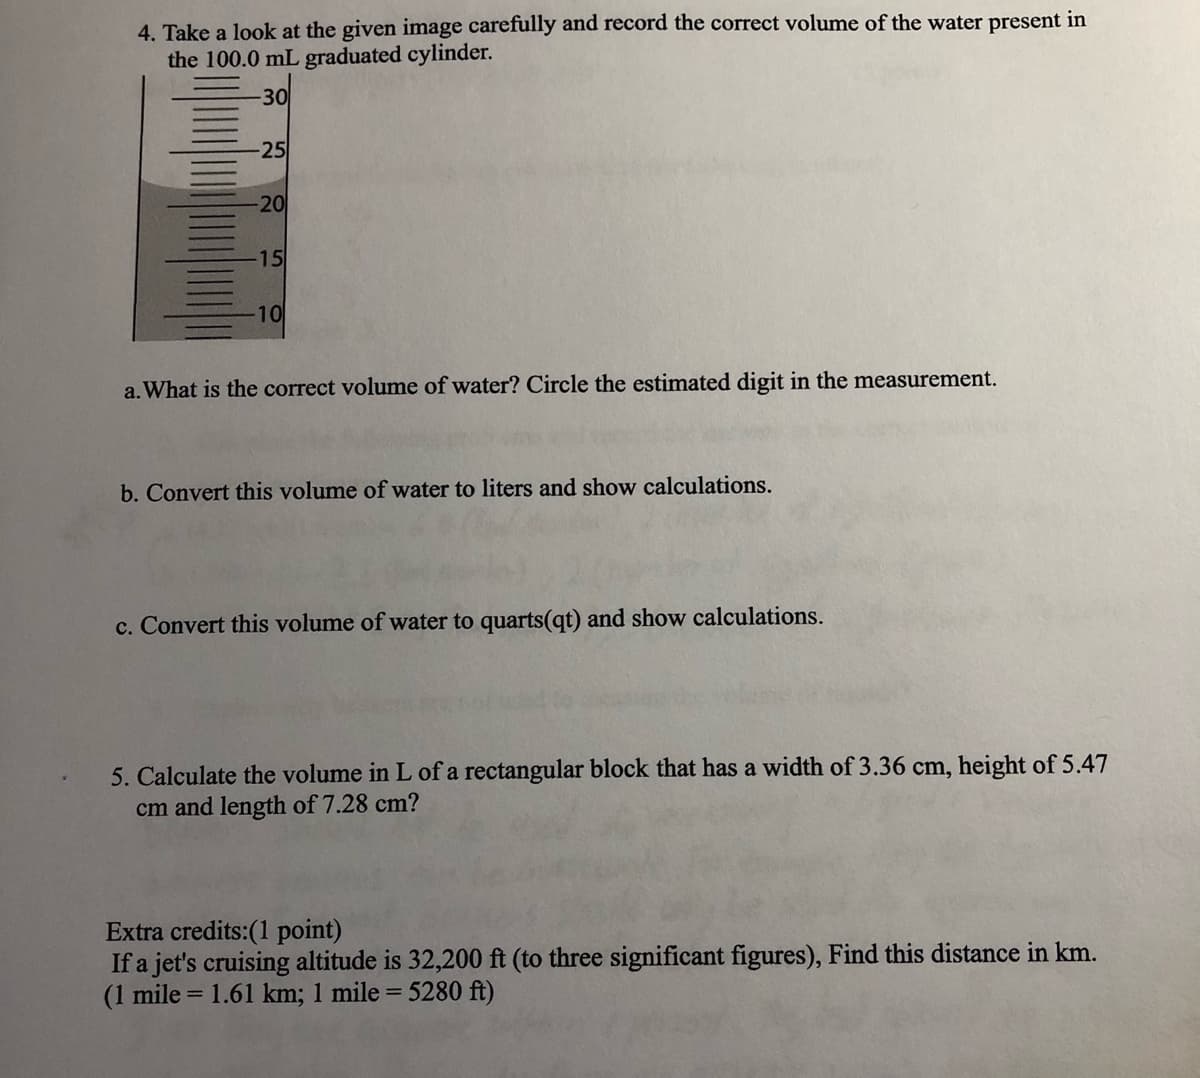 4. Take a look at the given image carefully and record the correct volume of the water present in
the 100.0 mL graduated cylinder.
-30
-25
-20
15
10
a. What is the correct volume of water? Circle the estimated digit in the measurement.
b. Convert this volume of water to liters and show calculations.
c. Convert this volume of water to quarts(qt) and show calculations.
5. Calculate the volume in L of a rectangular block that has a width of 3.36 cm, height of 5.47
cm and length of 7.28 cm?
Extra credits:(1 point)
If a jet's cruising altitude is 32,200 ft (to three significant figures), Find this distance in km.
(1 mile = 1.61 km; 1 mile = 5280 ft)
